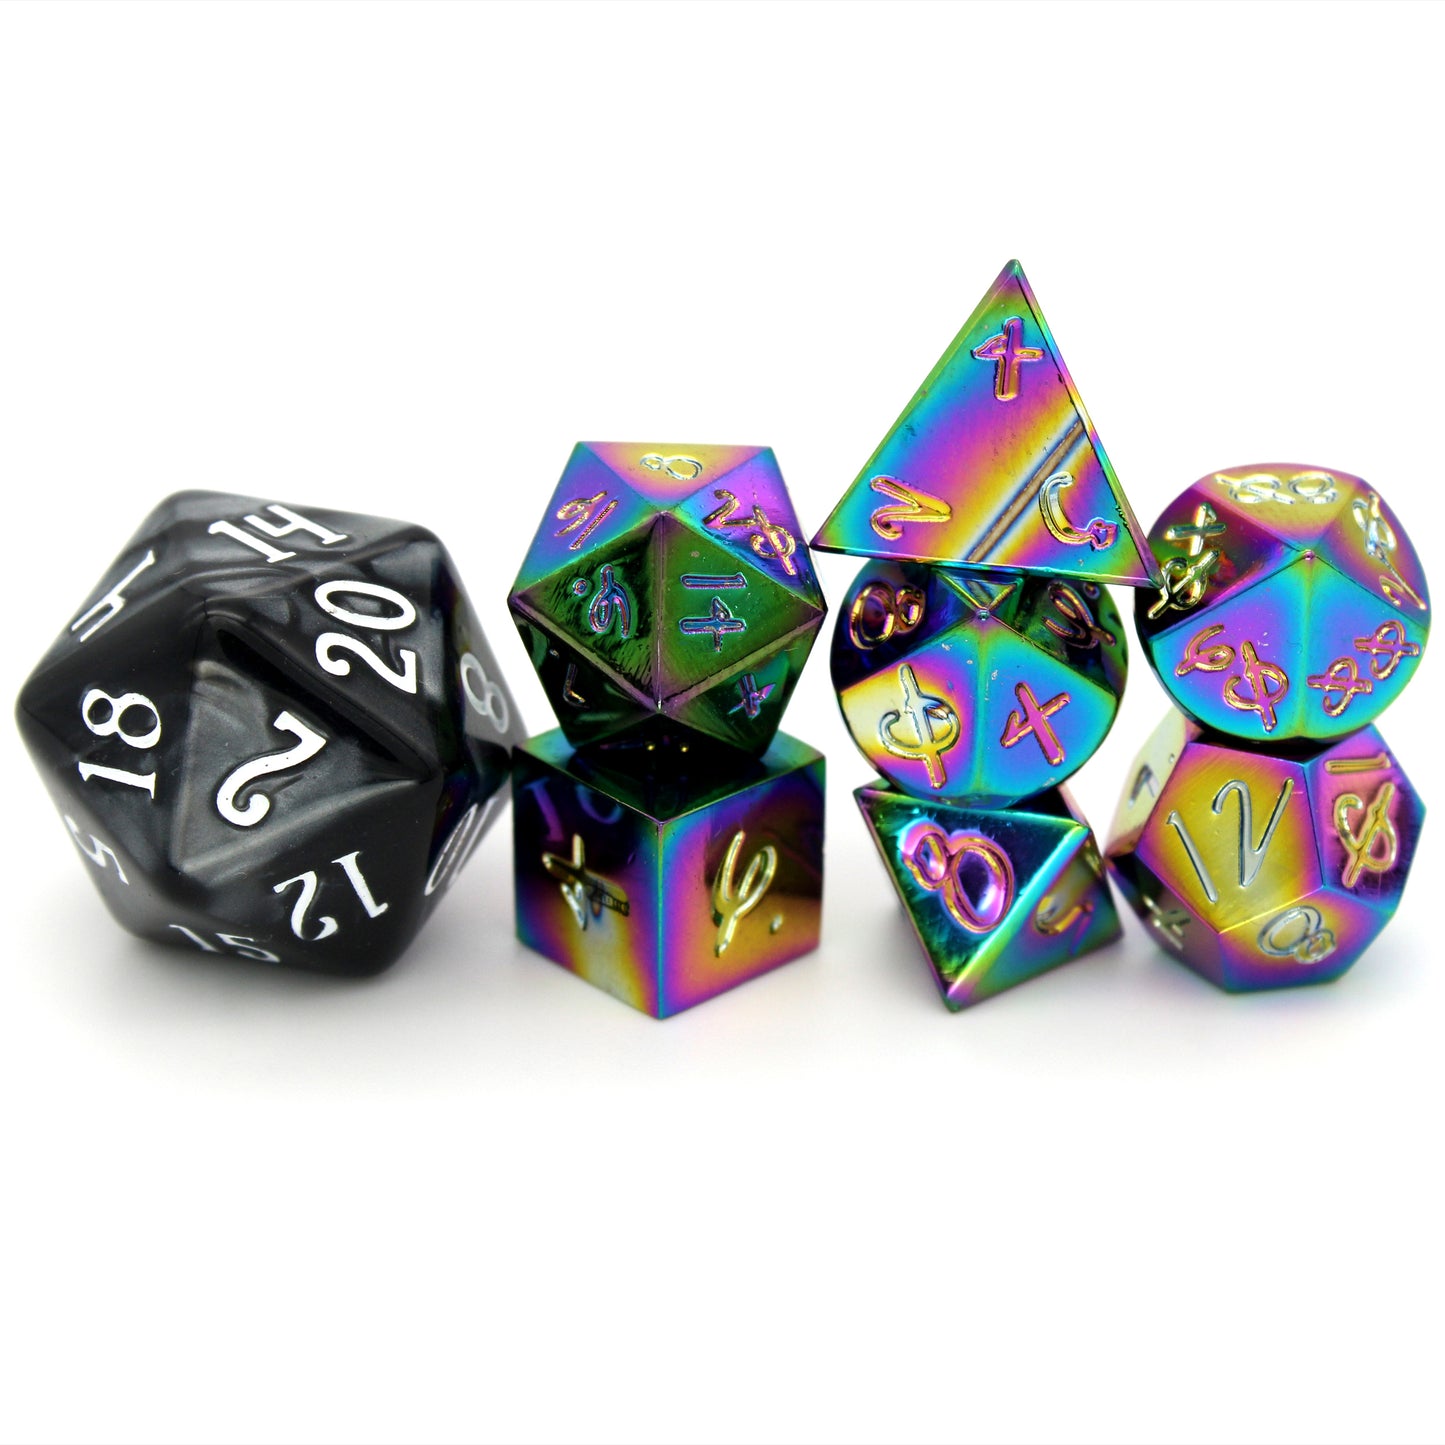 Mage Hand Wee Lads are 7-piece, 10mm metal sets sold in a variety of colors and inkings.